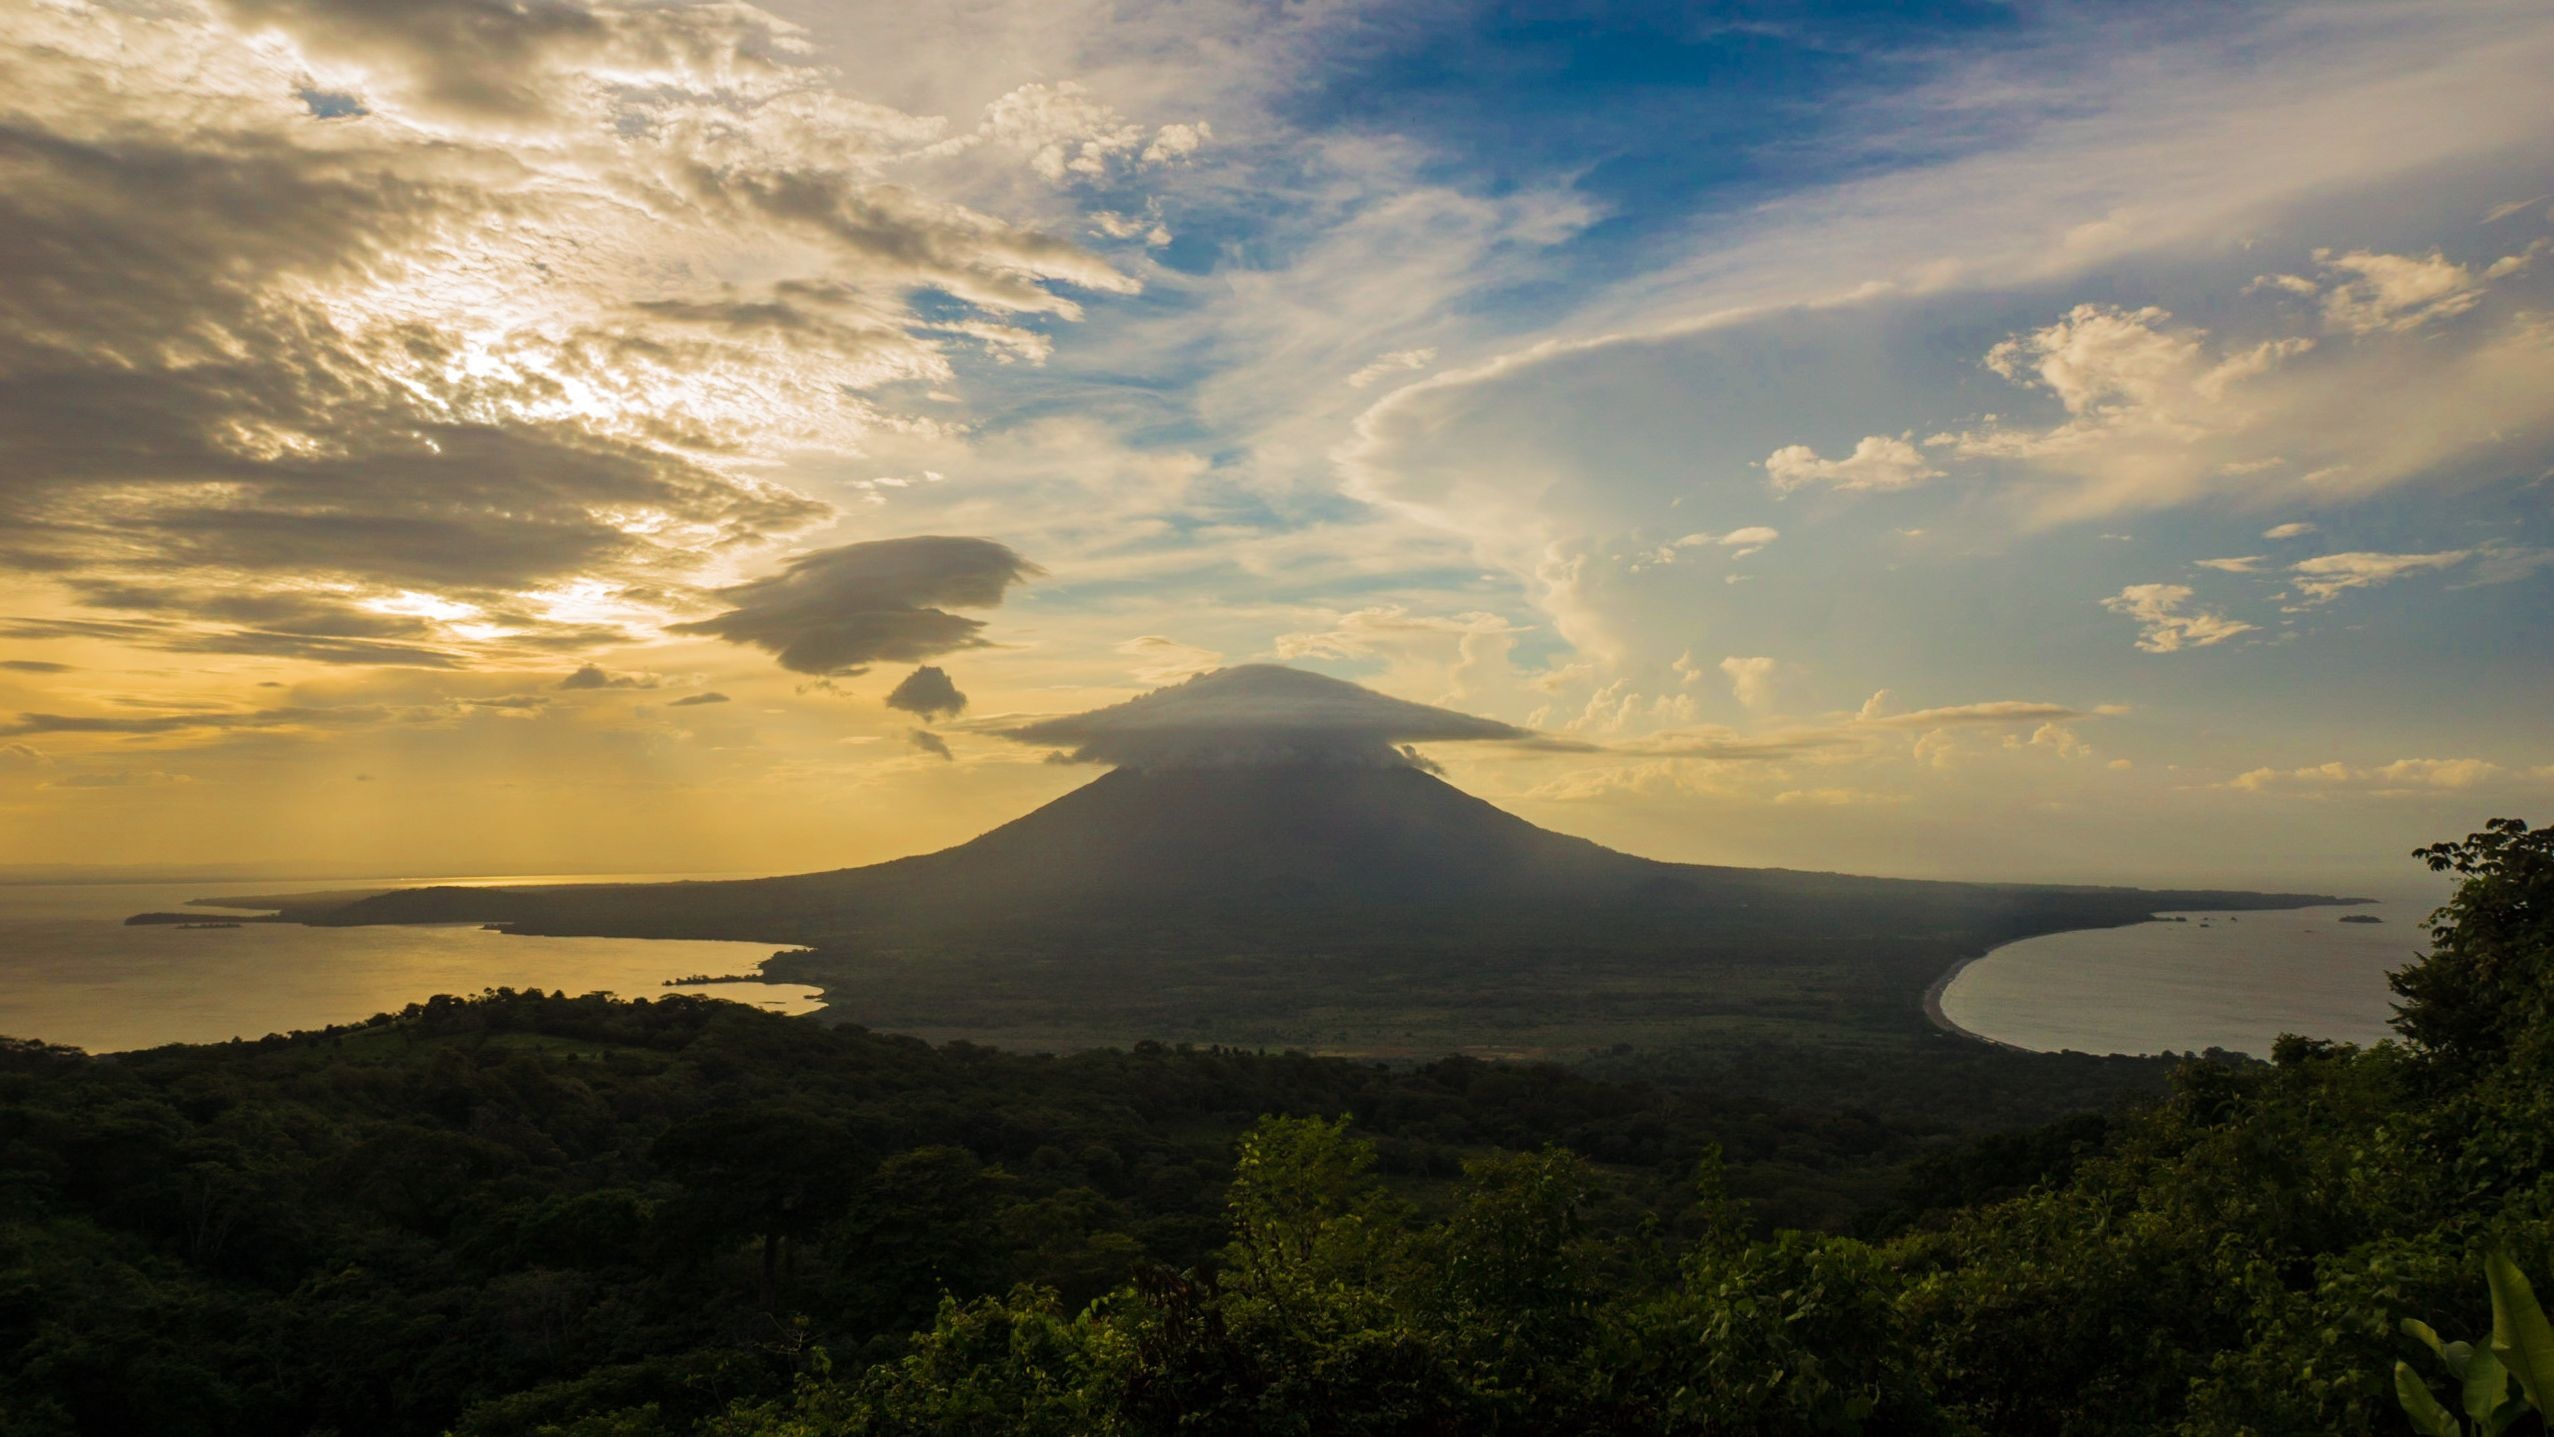 Nicaragua: A Central American nation known for its dramatic terrain of lakes, volcanoes, and beaches. 2560x1440 HD Wallpaper.